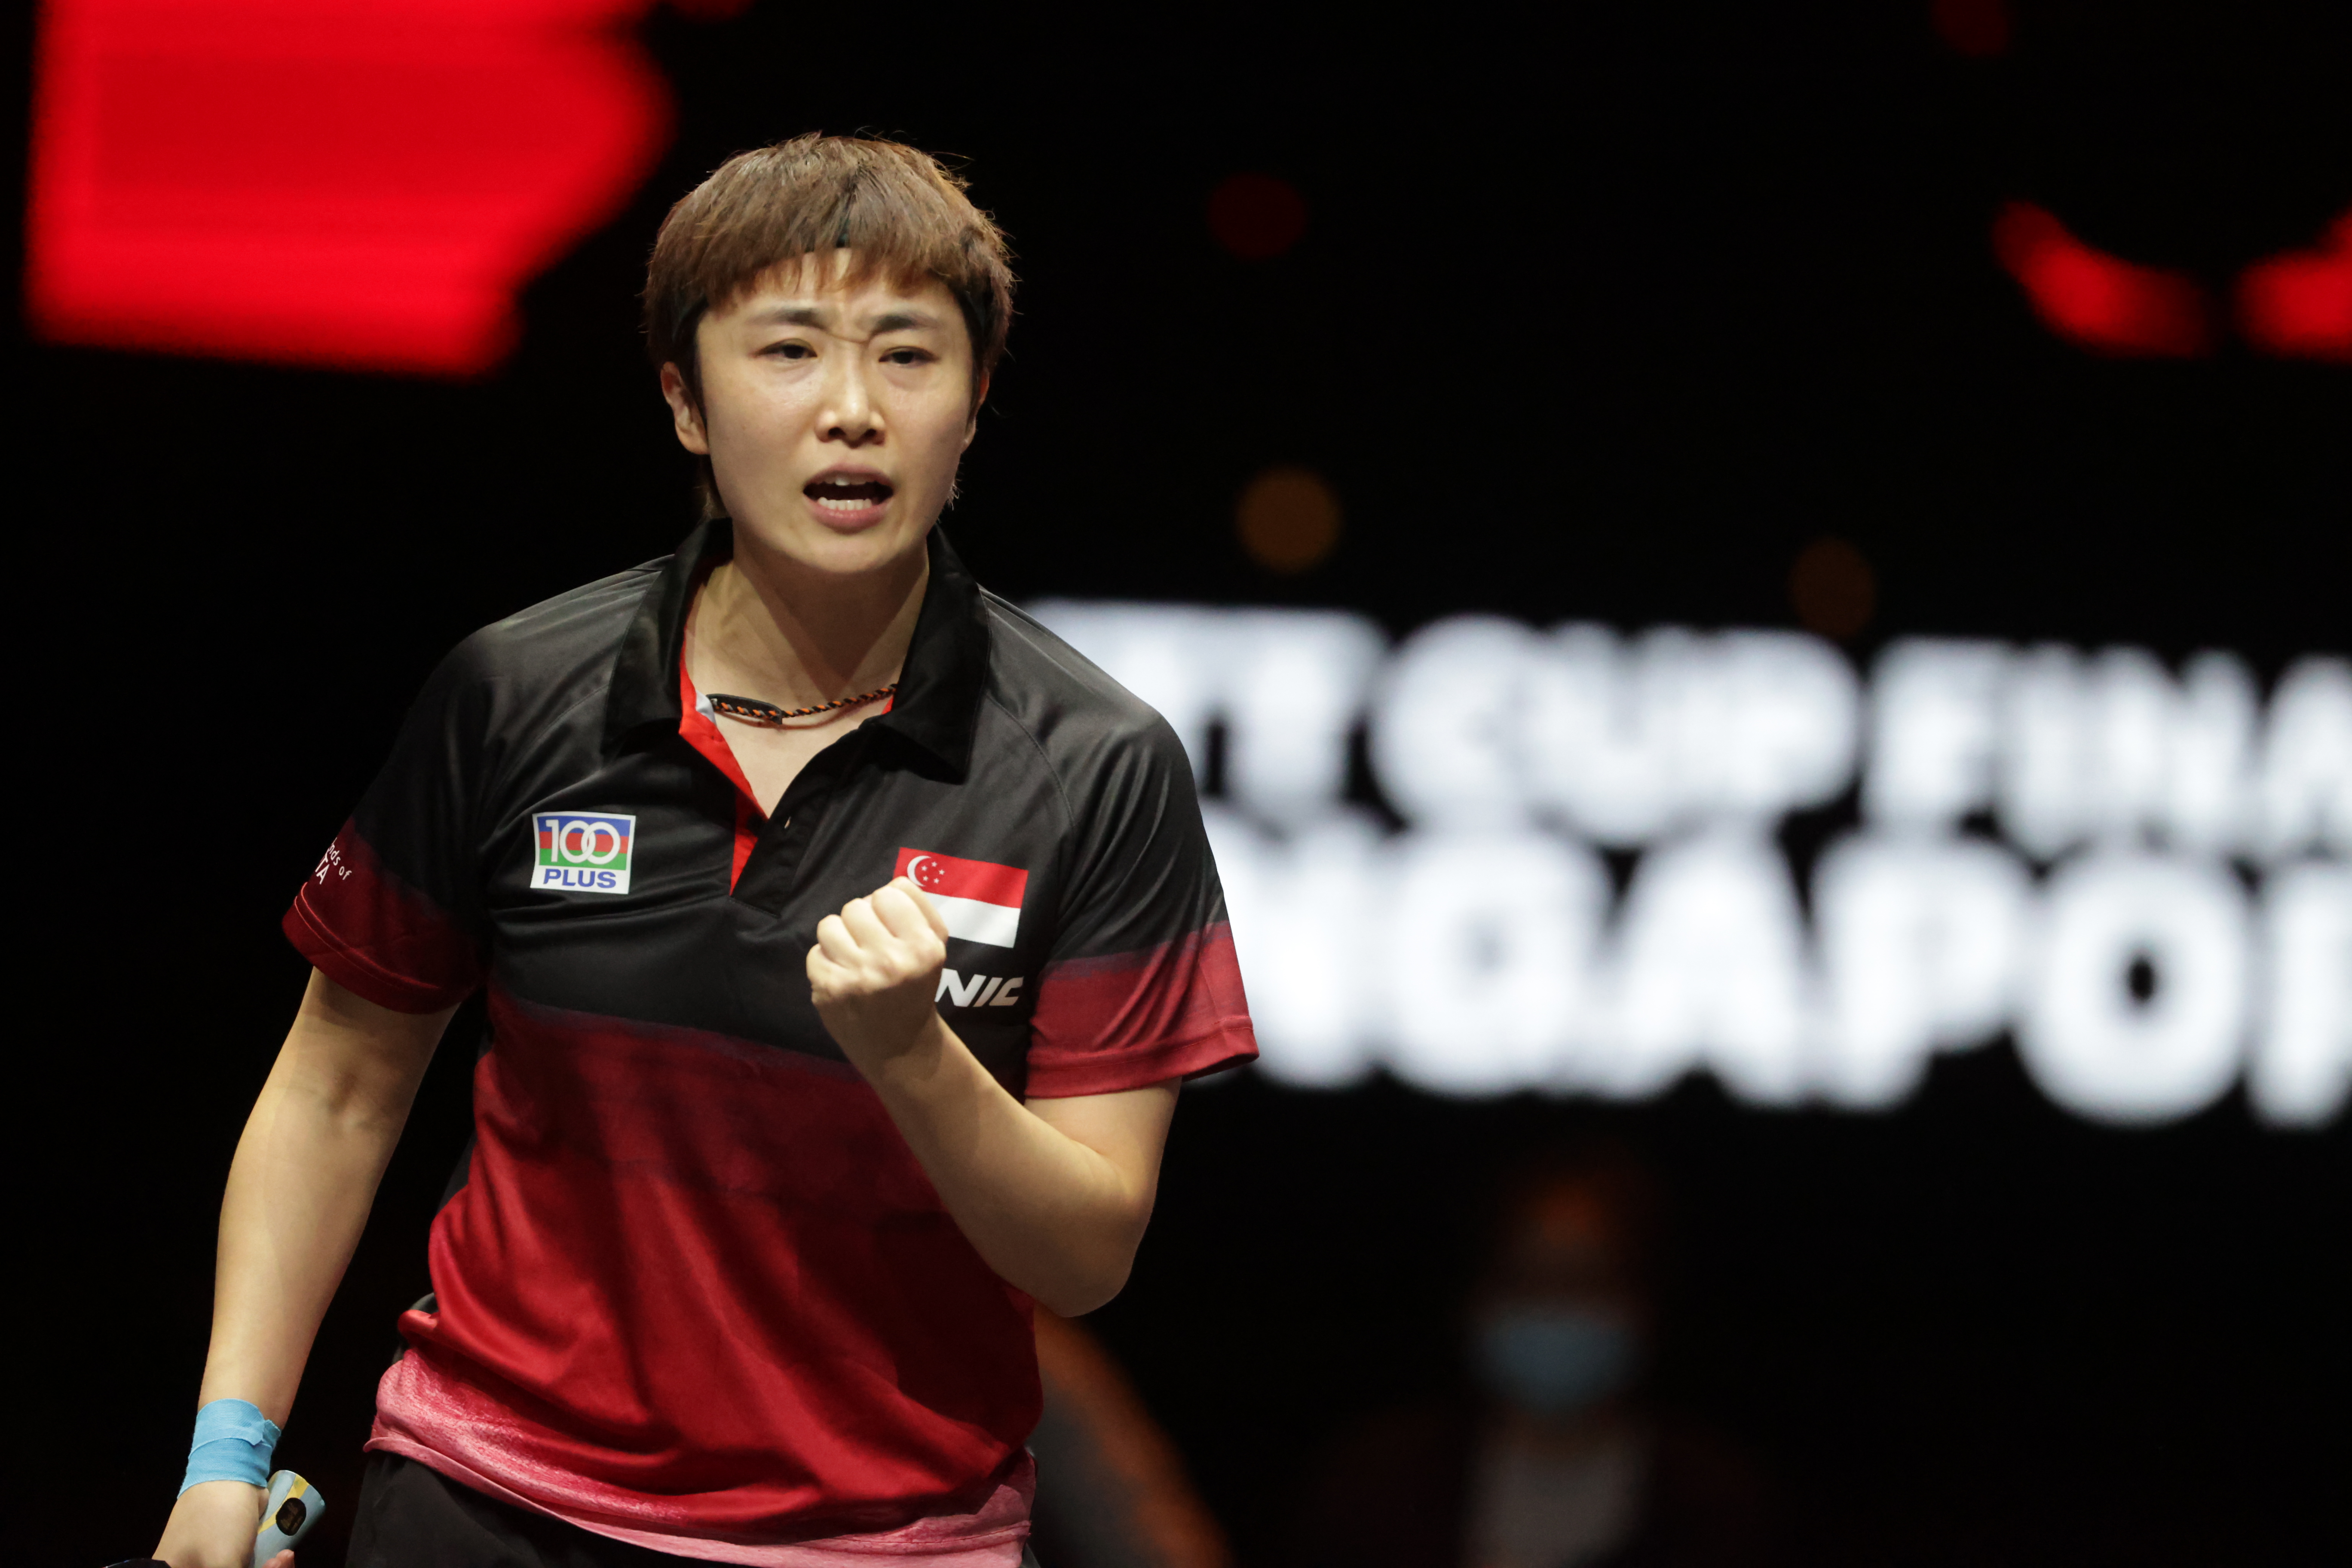 TeamSG's Feng Tianwei sets up a showdown against World No 1 Chen Meng in the last 8, at the star-studded WTT Cup Finals in Singapore!